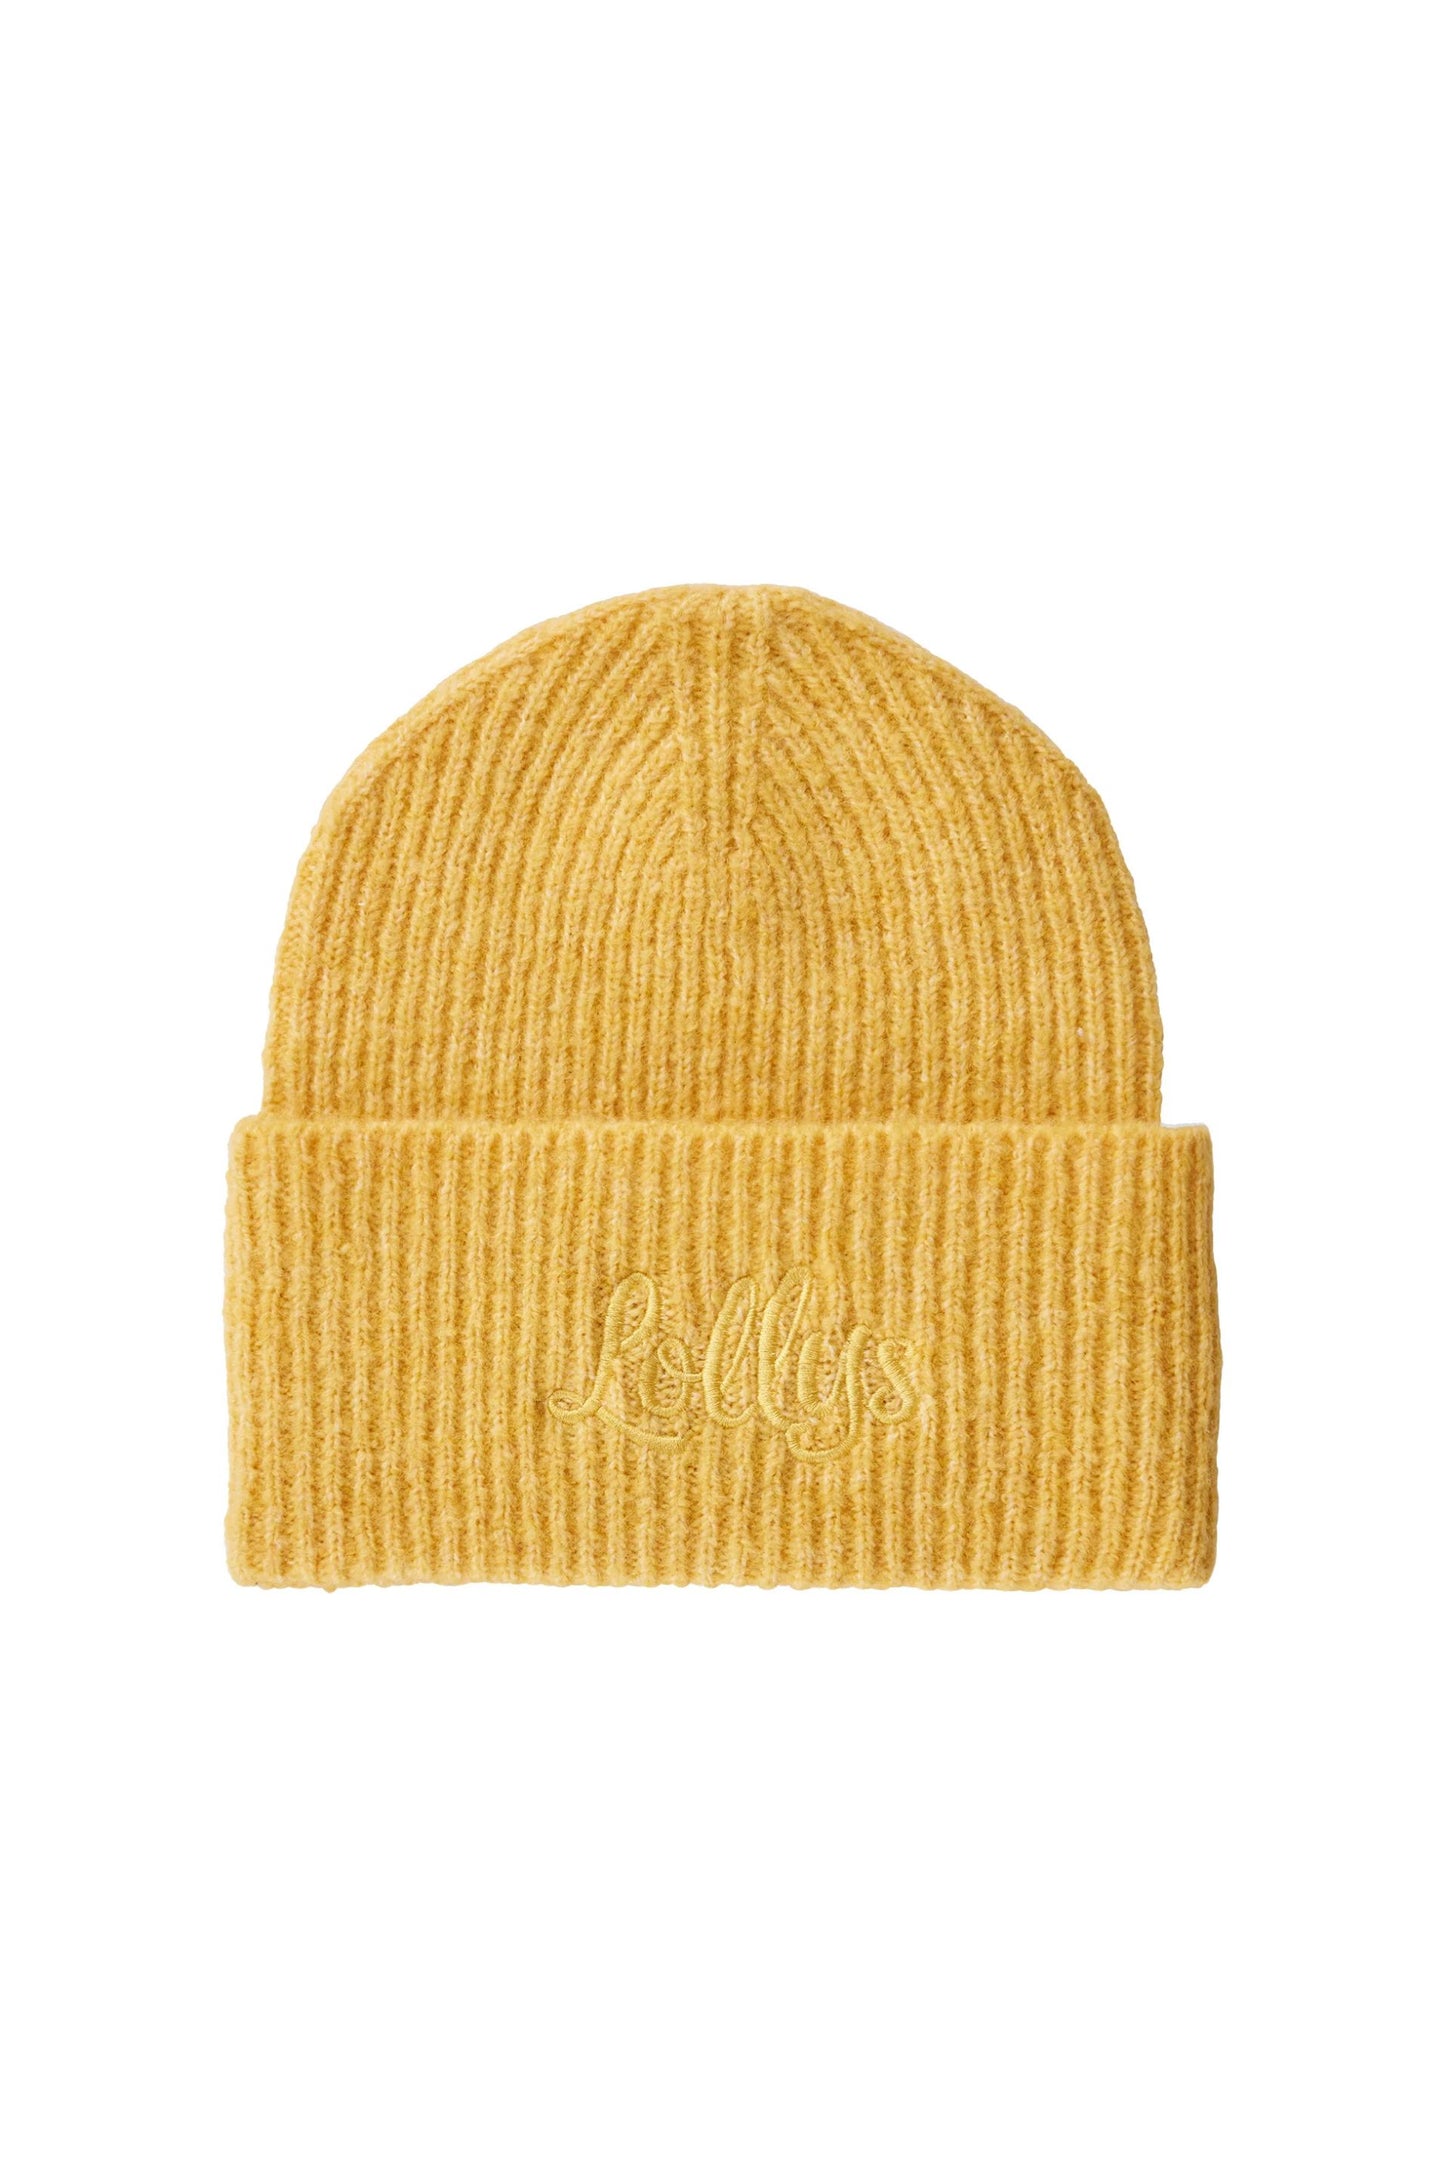 Lollys Laundry ForrestLL Beanie Accessories 39 Yellow